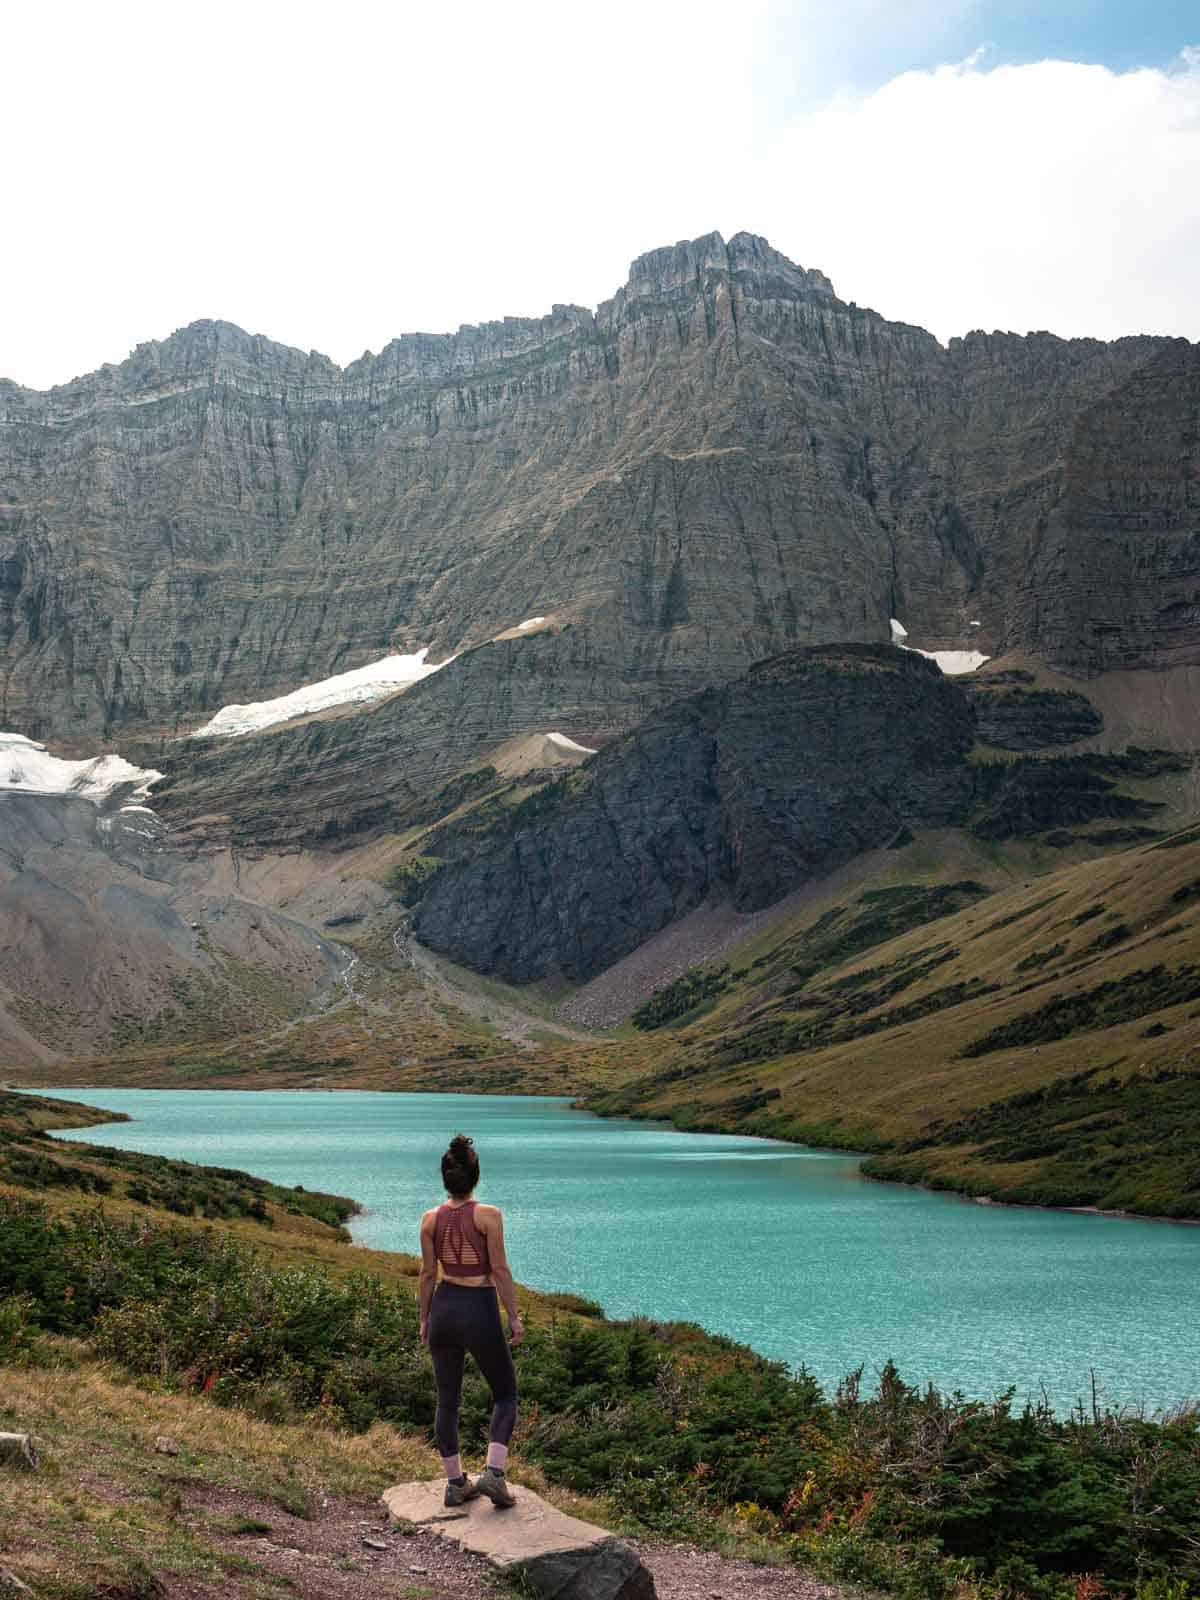 Glacier National Park is a highlight on a Montana road trip.